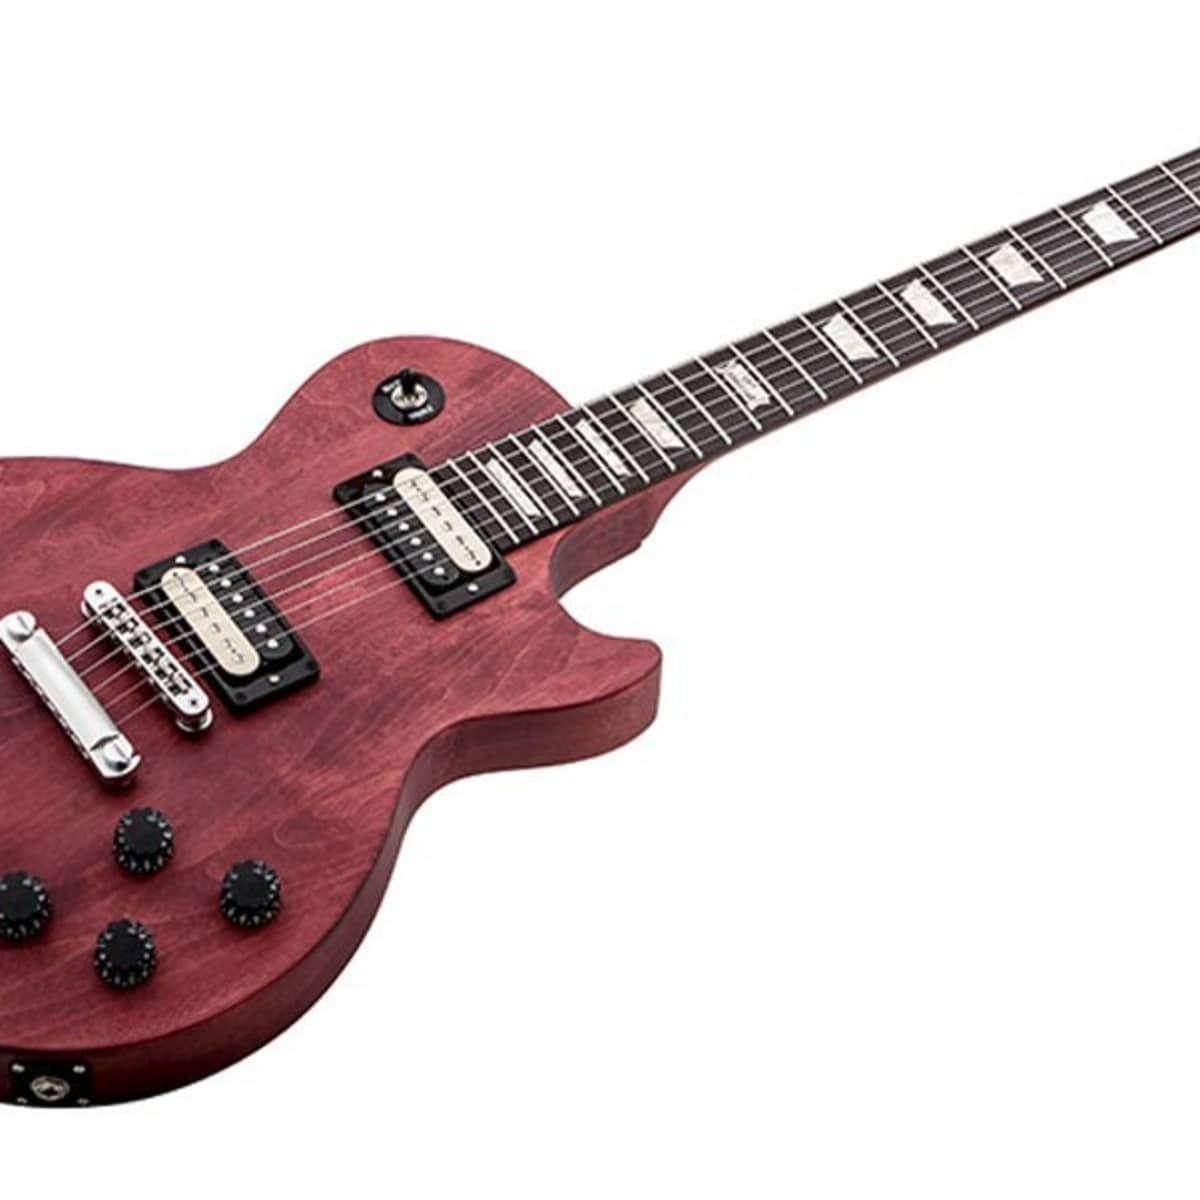 Gibson Les Paul LPJ Review - Spinditty